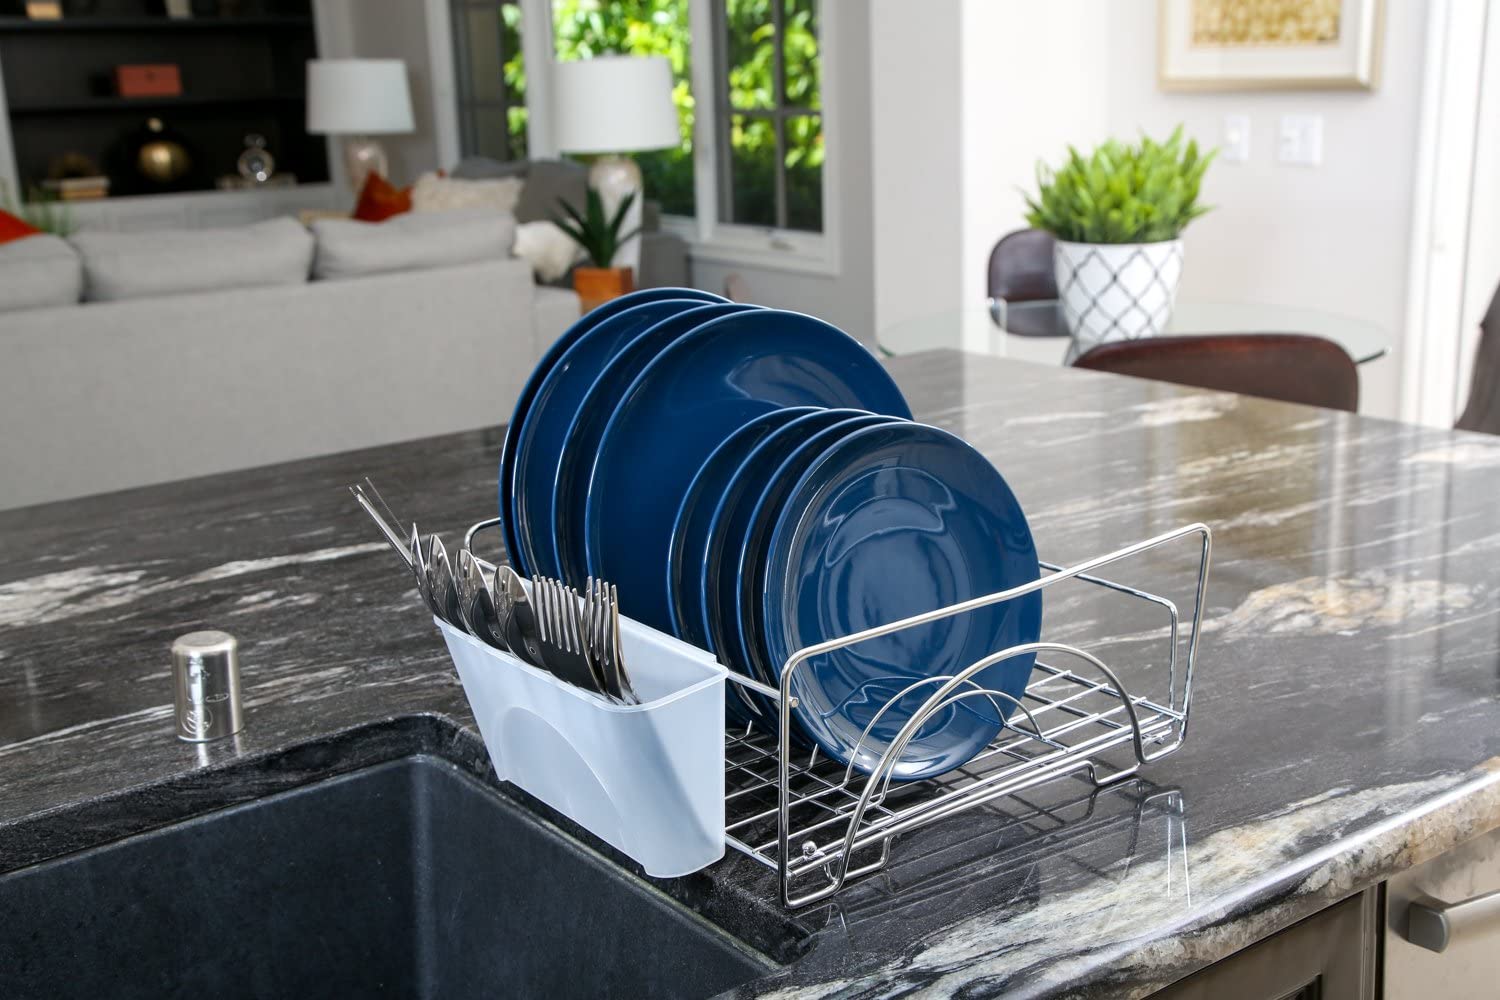 Expandable Dish Drying Rack Over the Sink Dish Rack In On Counter Drying  Rack Kitchen Small Dish Drying Rack